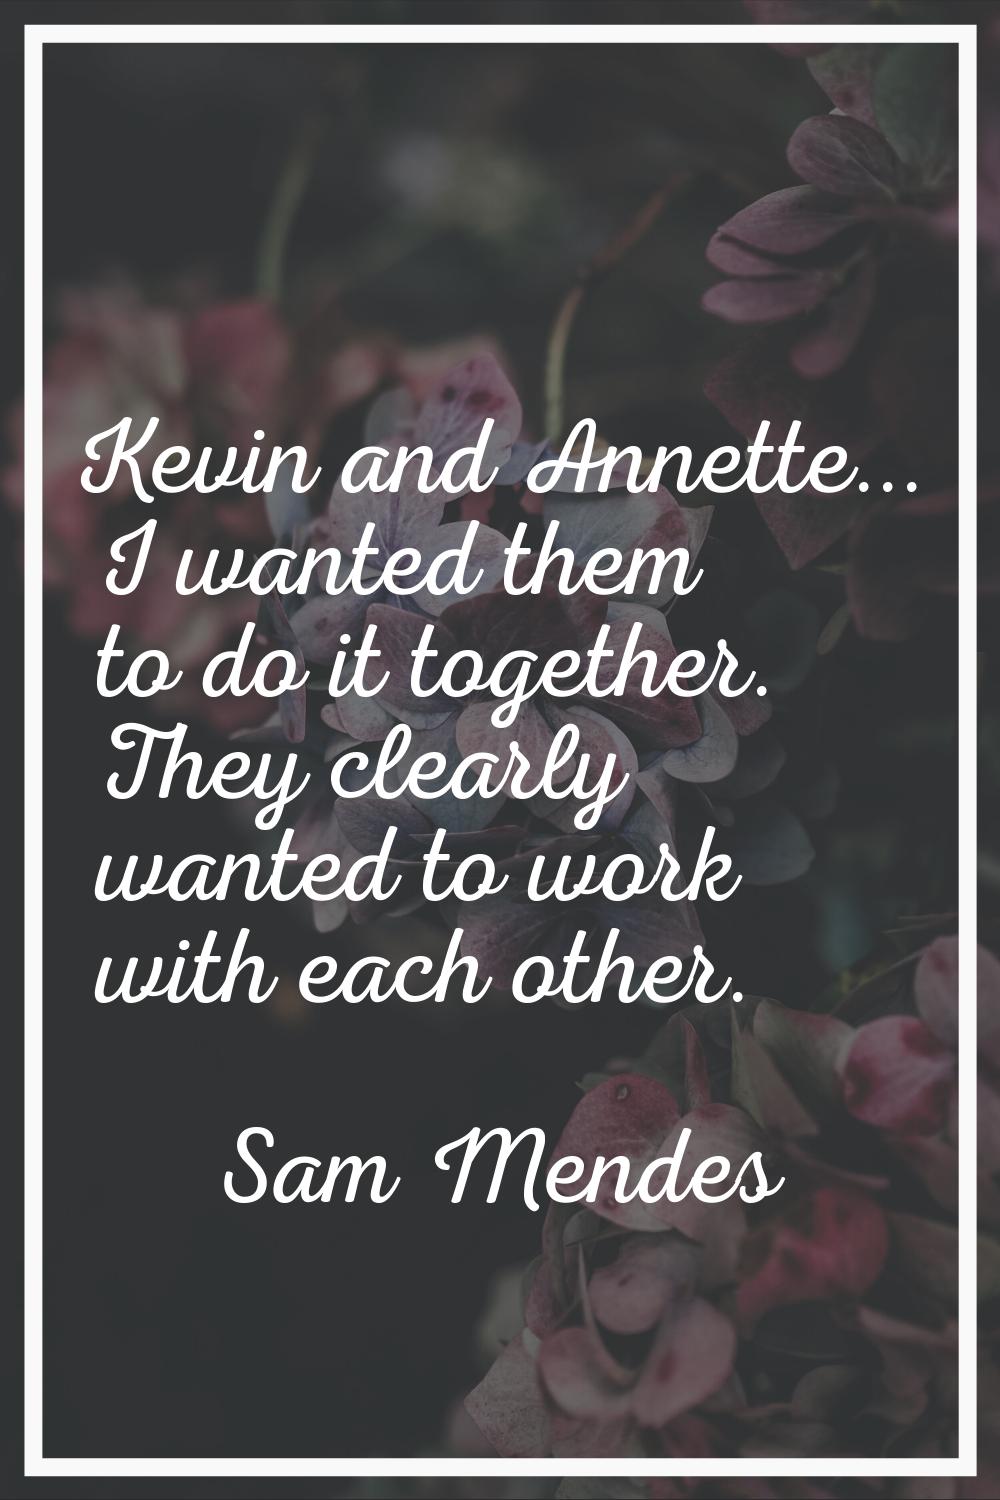 Kevin and Annette... I wanted them to do it together. They clearly wanted to work with each other.